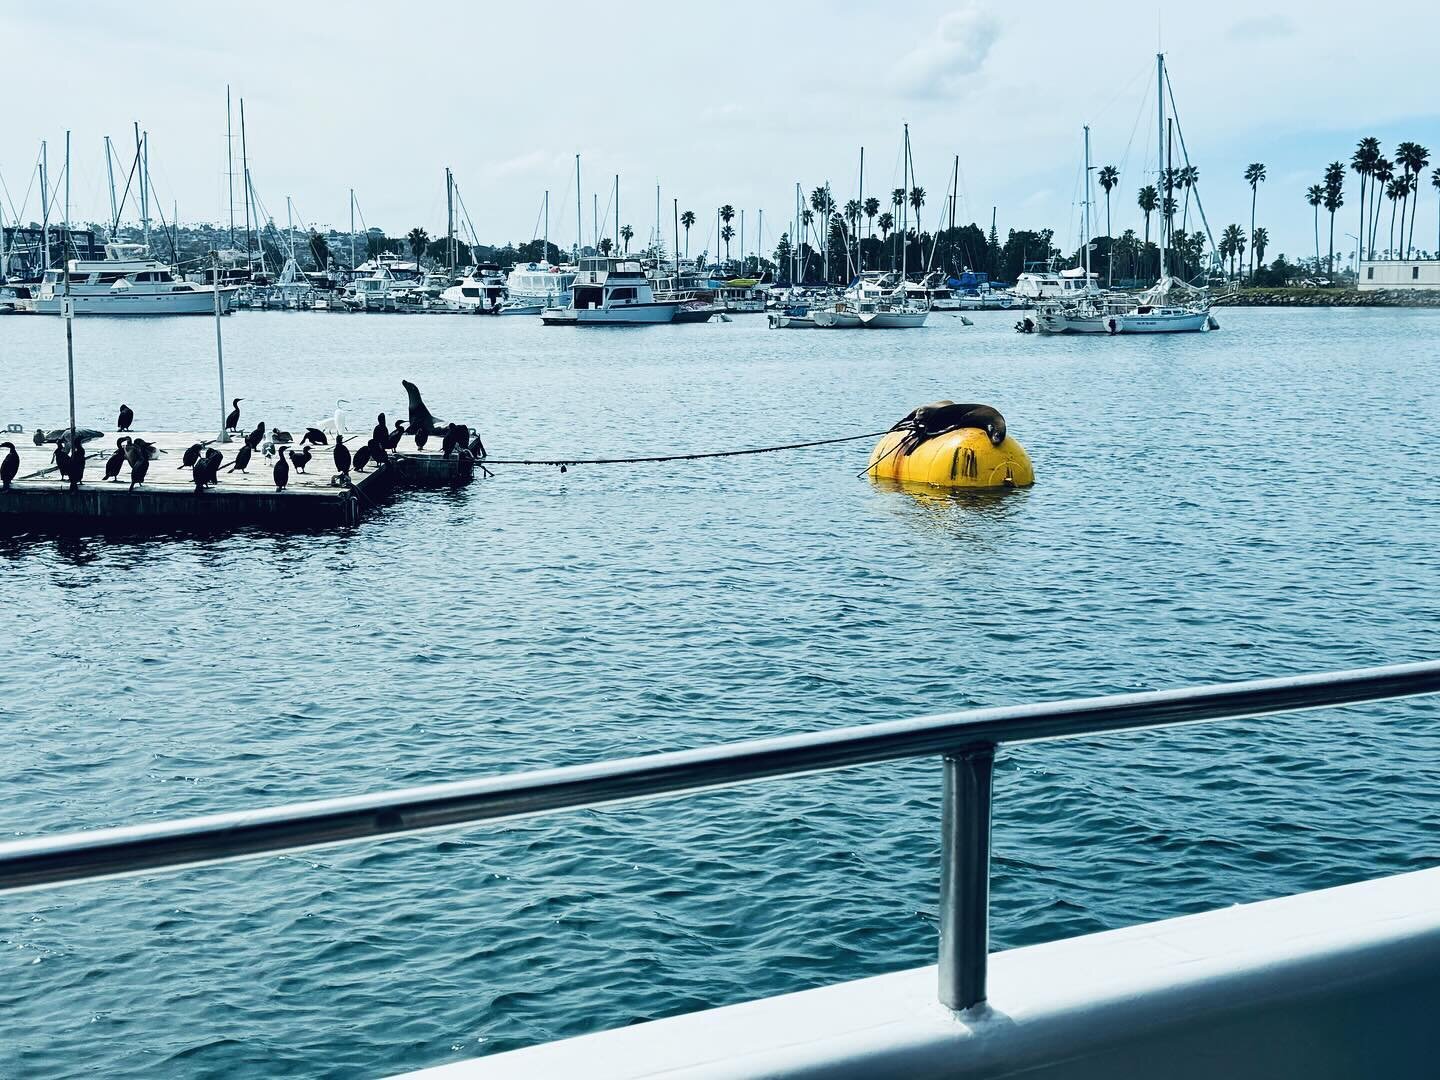 San Diego, you were dreamy as ever - thank you and @theoldglobe for an excellent two weeks.

#missionbaysandiego #lajollabeach #travelingdesigner #whalewatching